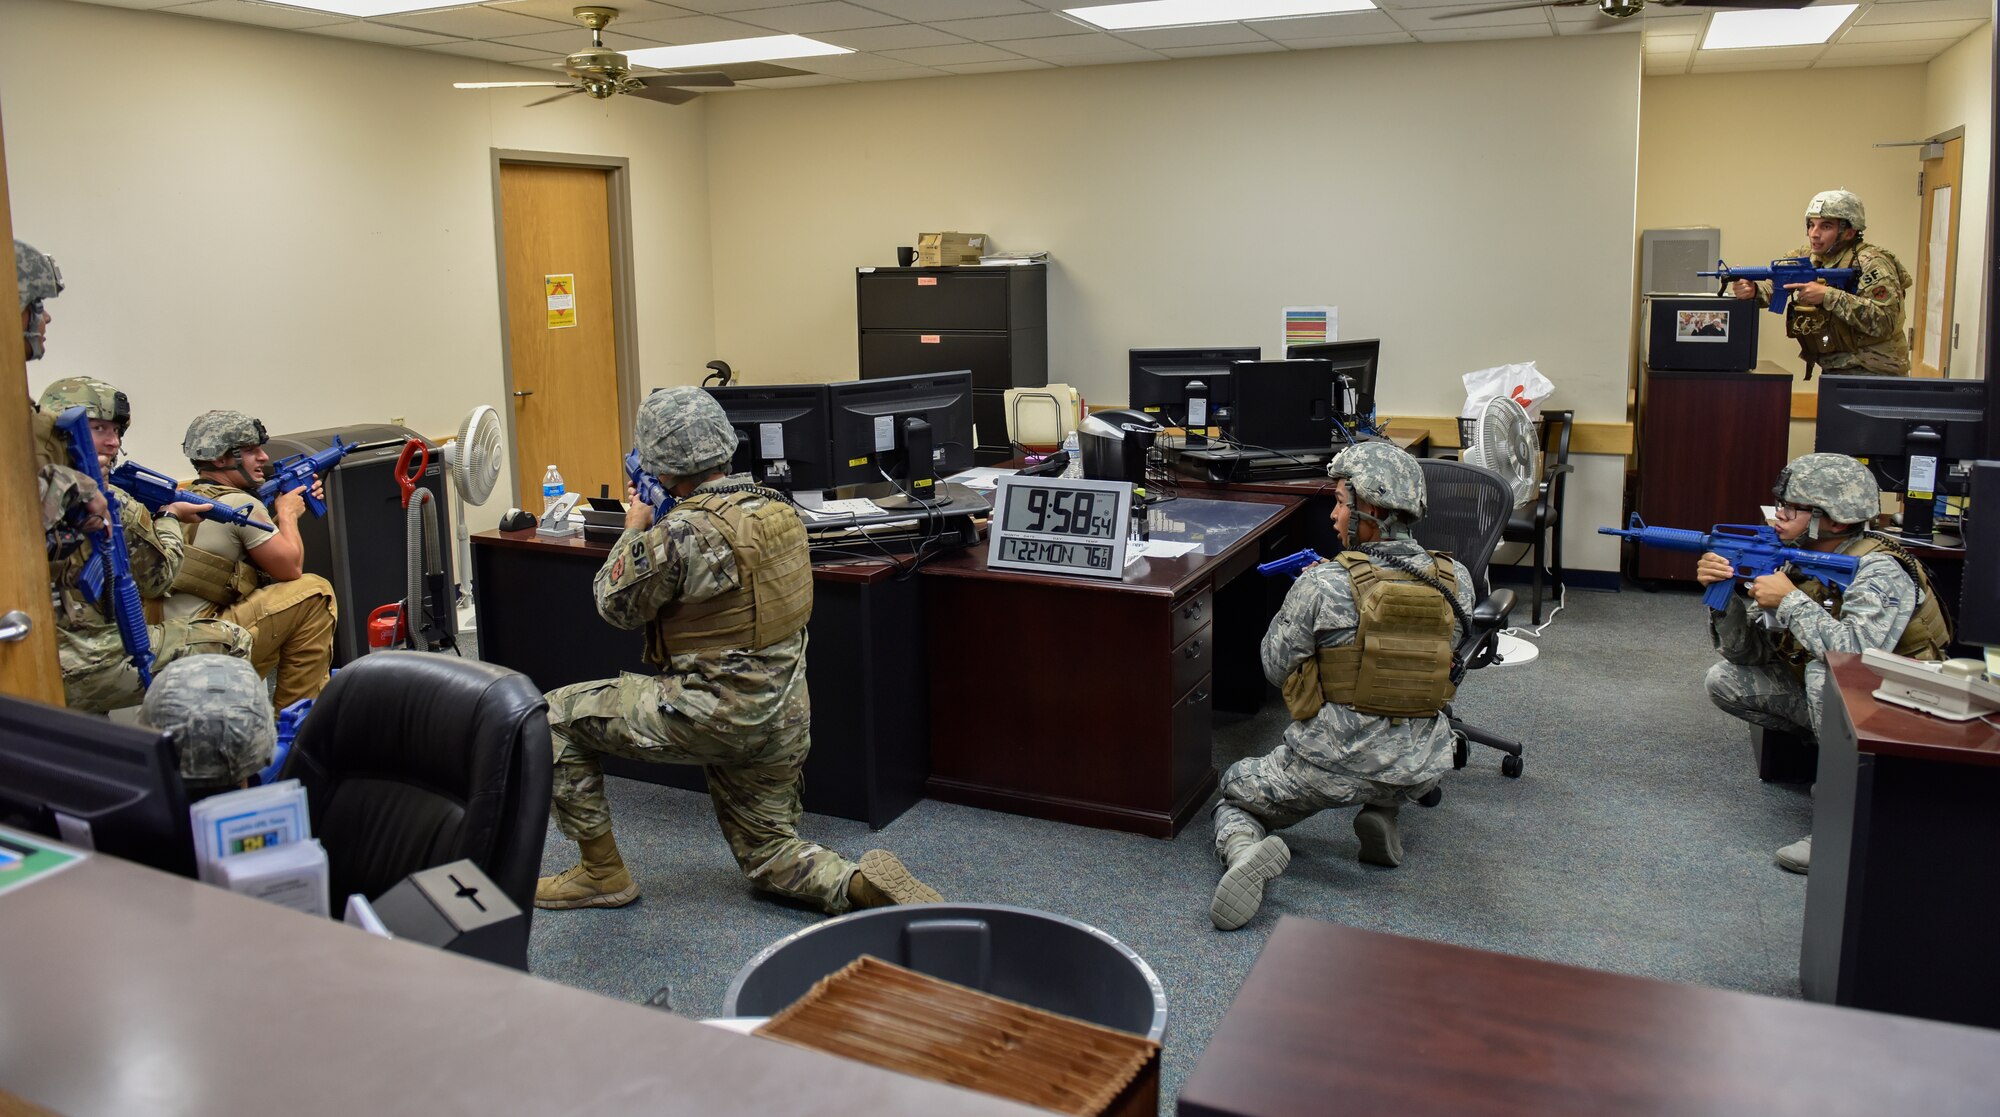 Members of the 47th Security Forces Squadron prepare to recover simulated hostages during a training exercise at Laughlin Air Force Base, Texas, July 22, 2019. A simulated suspect barricaded himself in a small room and tested the defenders’ ability to respond to a hostage situation. Exercises like this one are aimed at bolstering crisis readiness and response capabilities. (U.S. Air Force photo by Staff Sgt. Benjamin N. Valmoja)